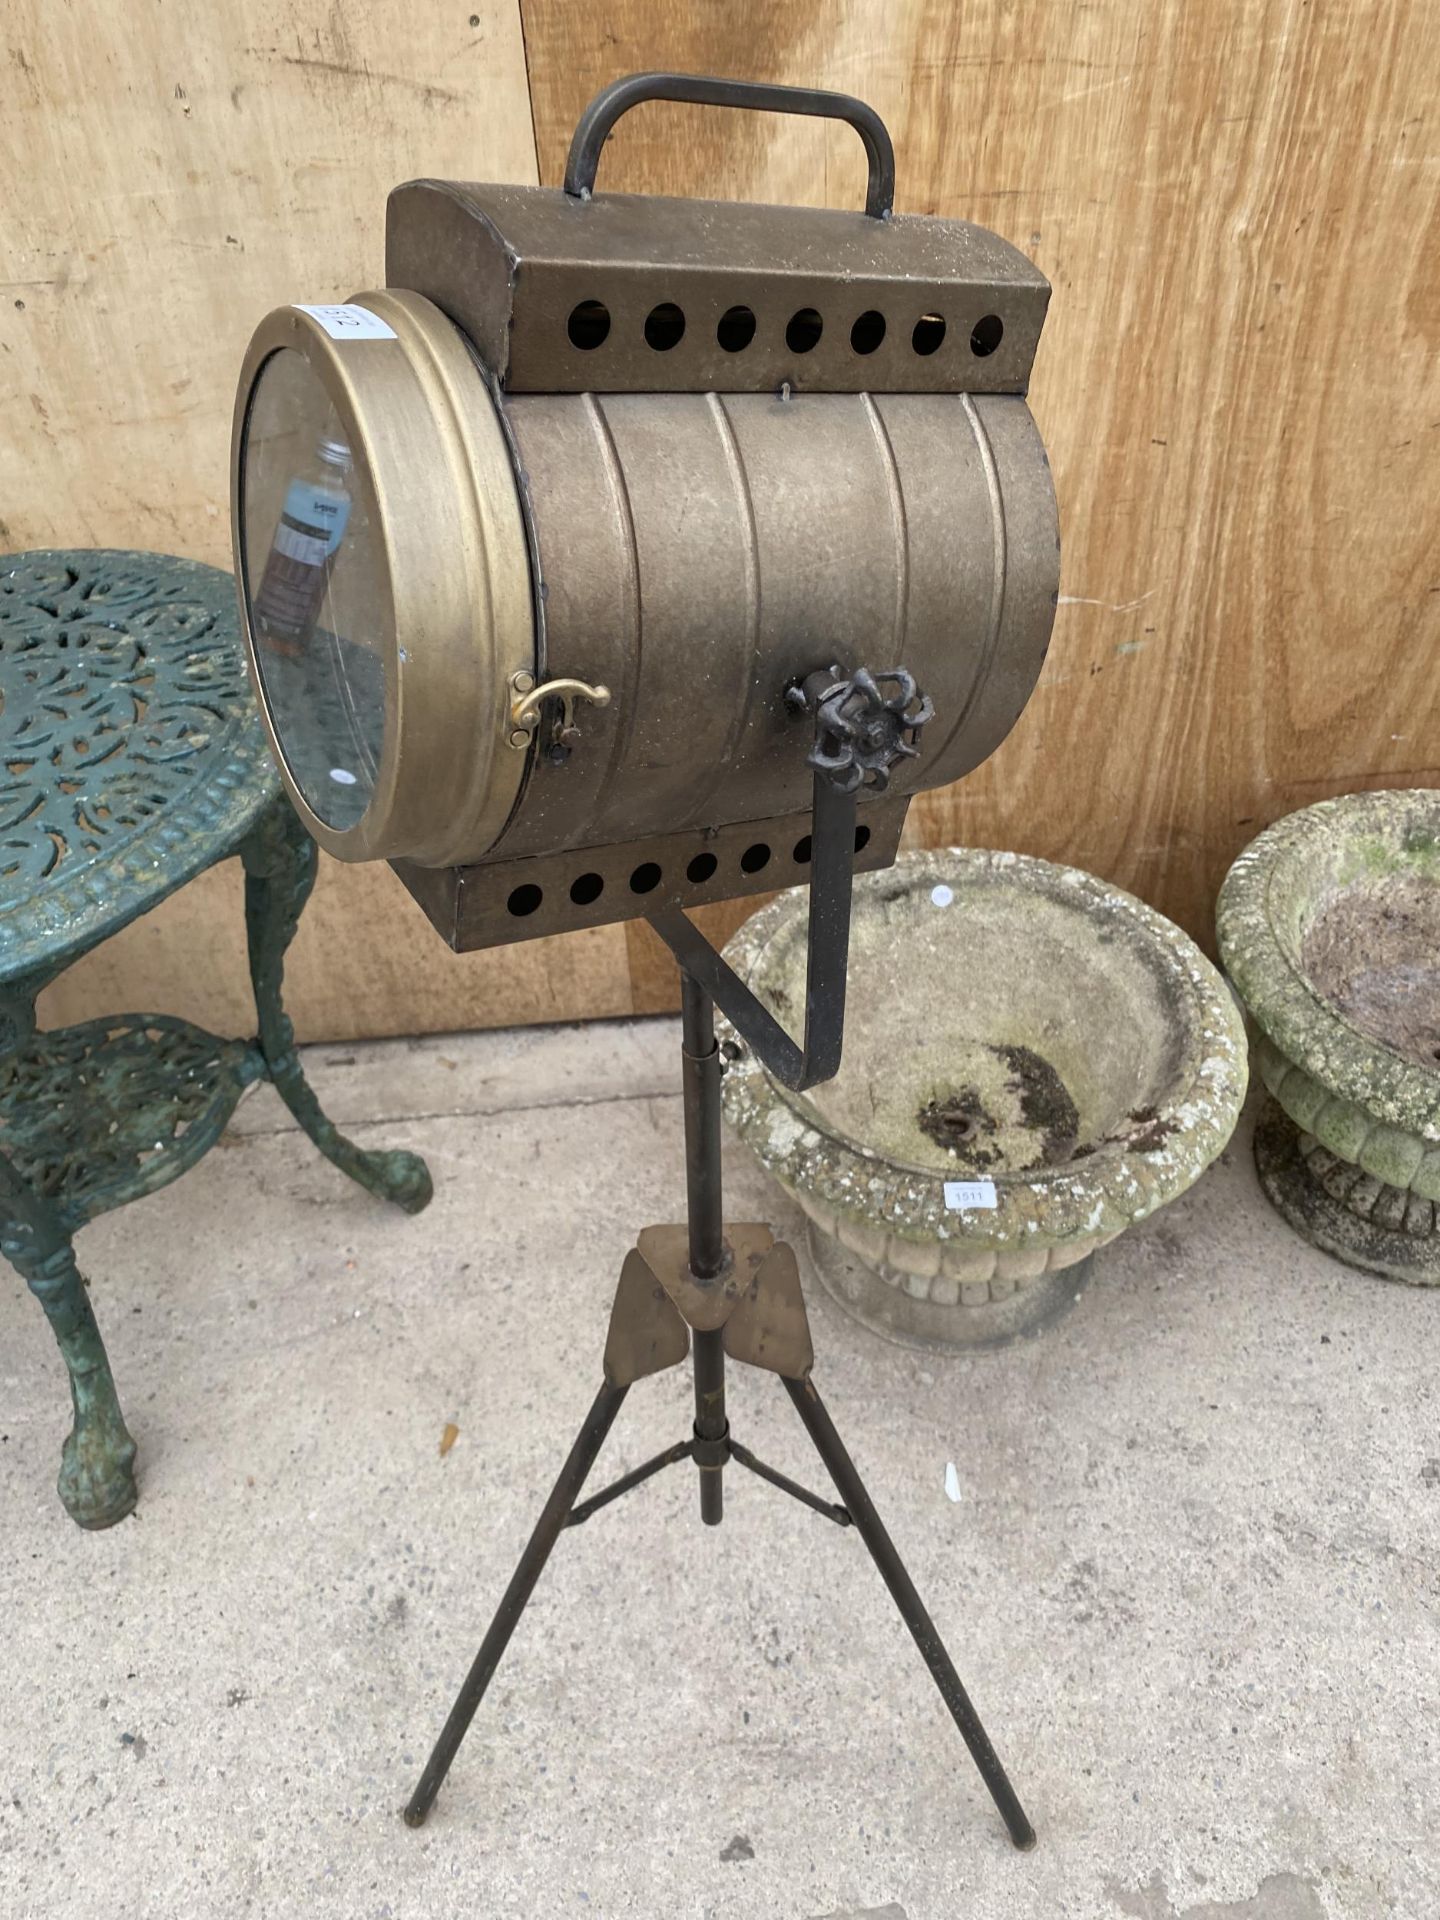 A VINTAGE STYLE THEARTE LIGHT FLOOR LAMP WITH TRIPOD BASE - Image 3 of 7